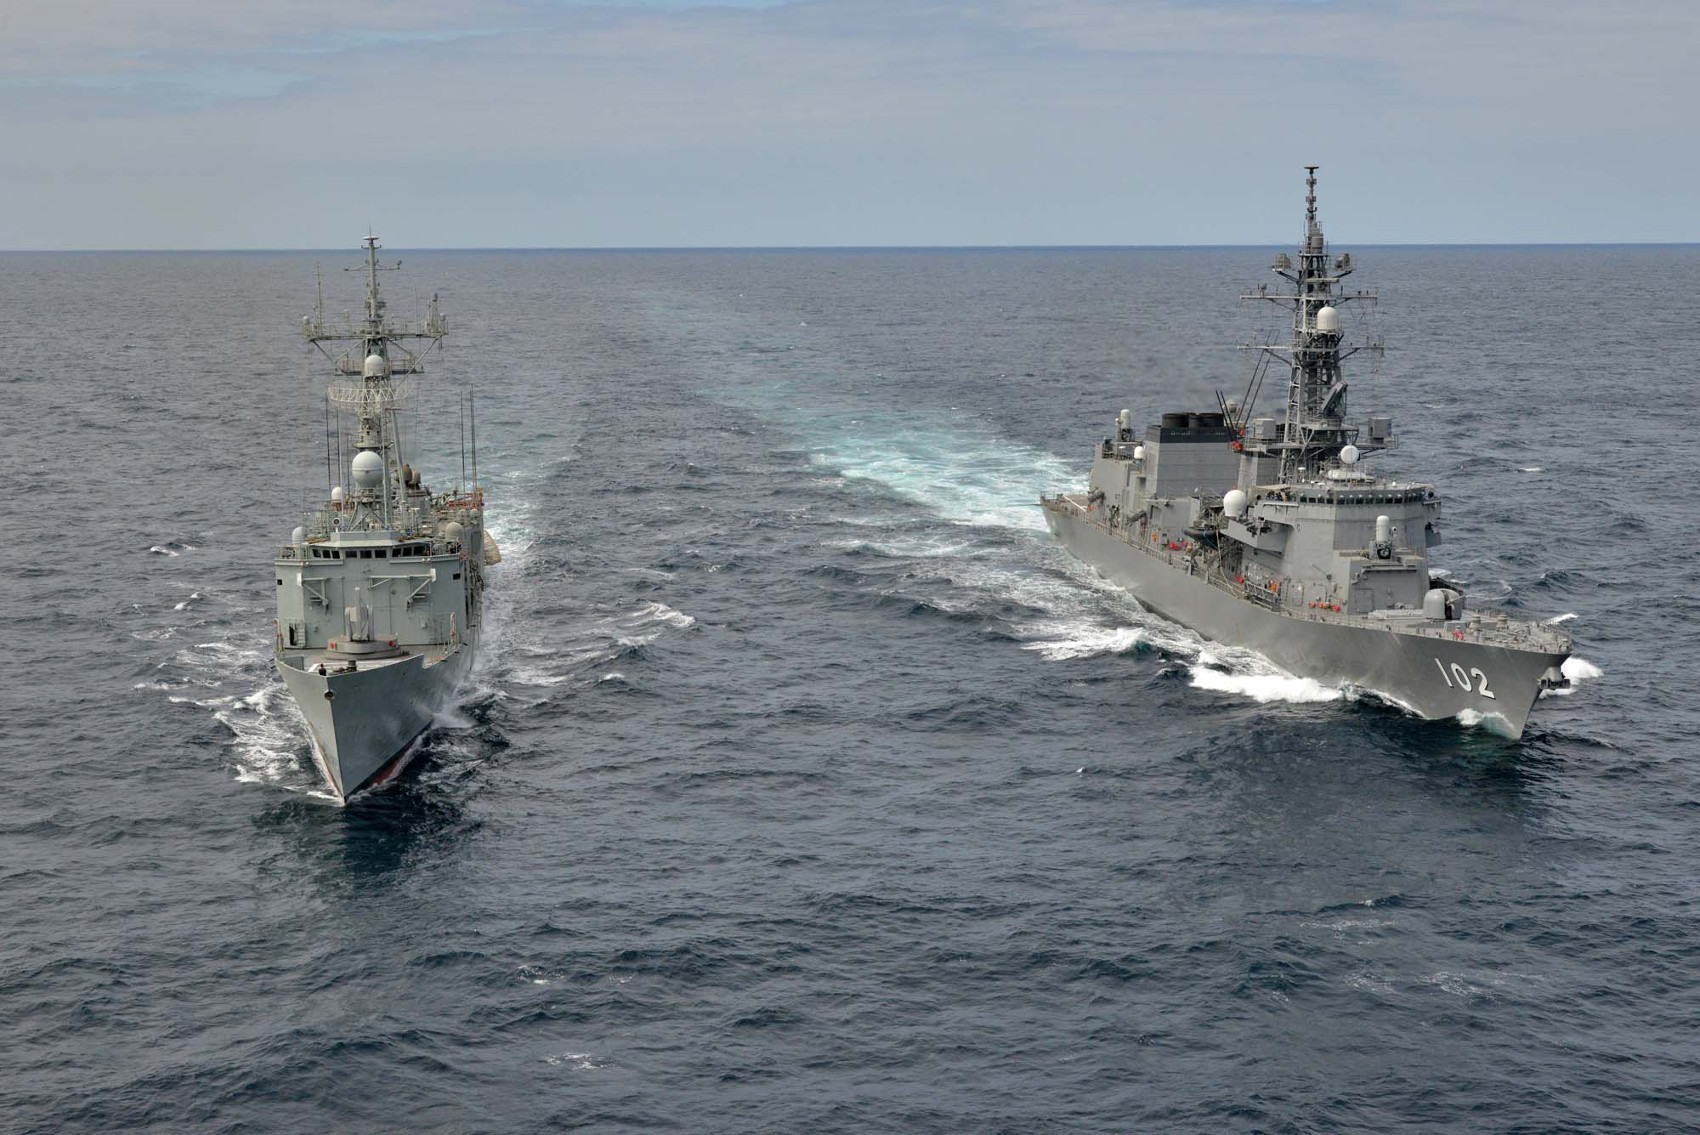 The frigate 'Victoria' conducts exercises with the Japanese Navy ship “Harusame”